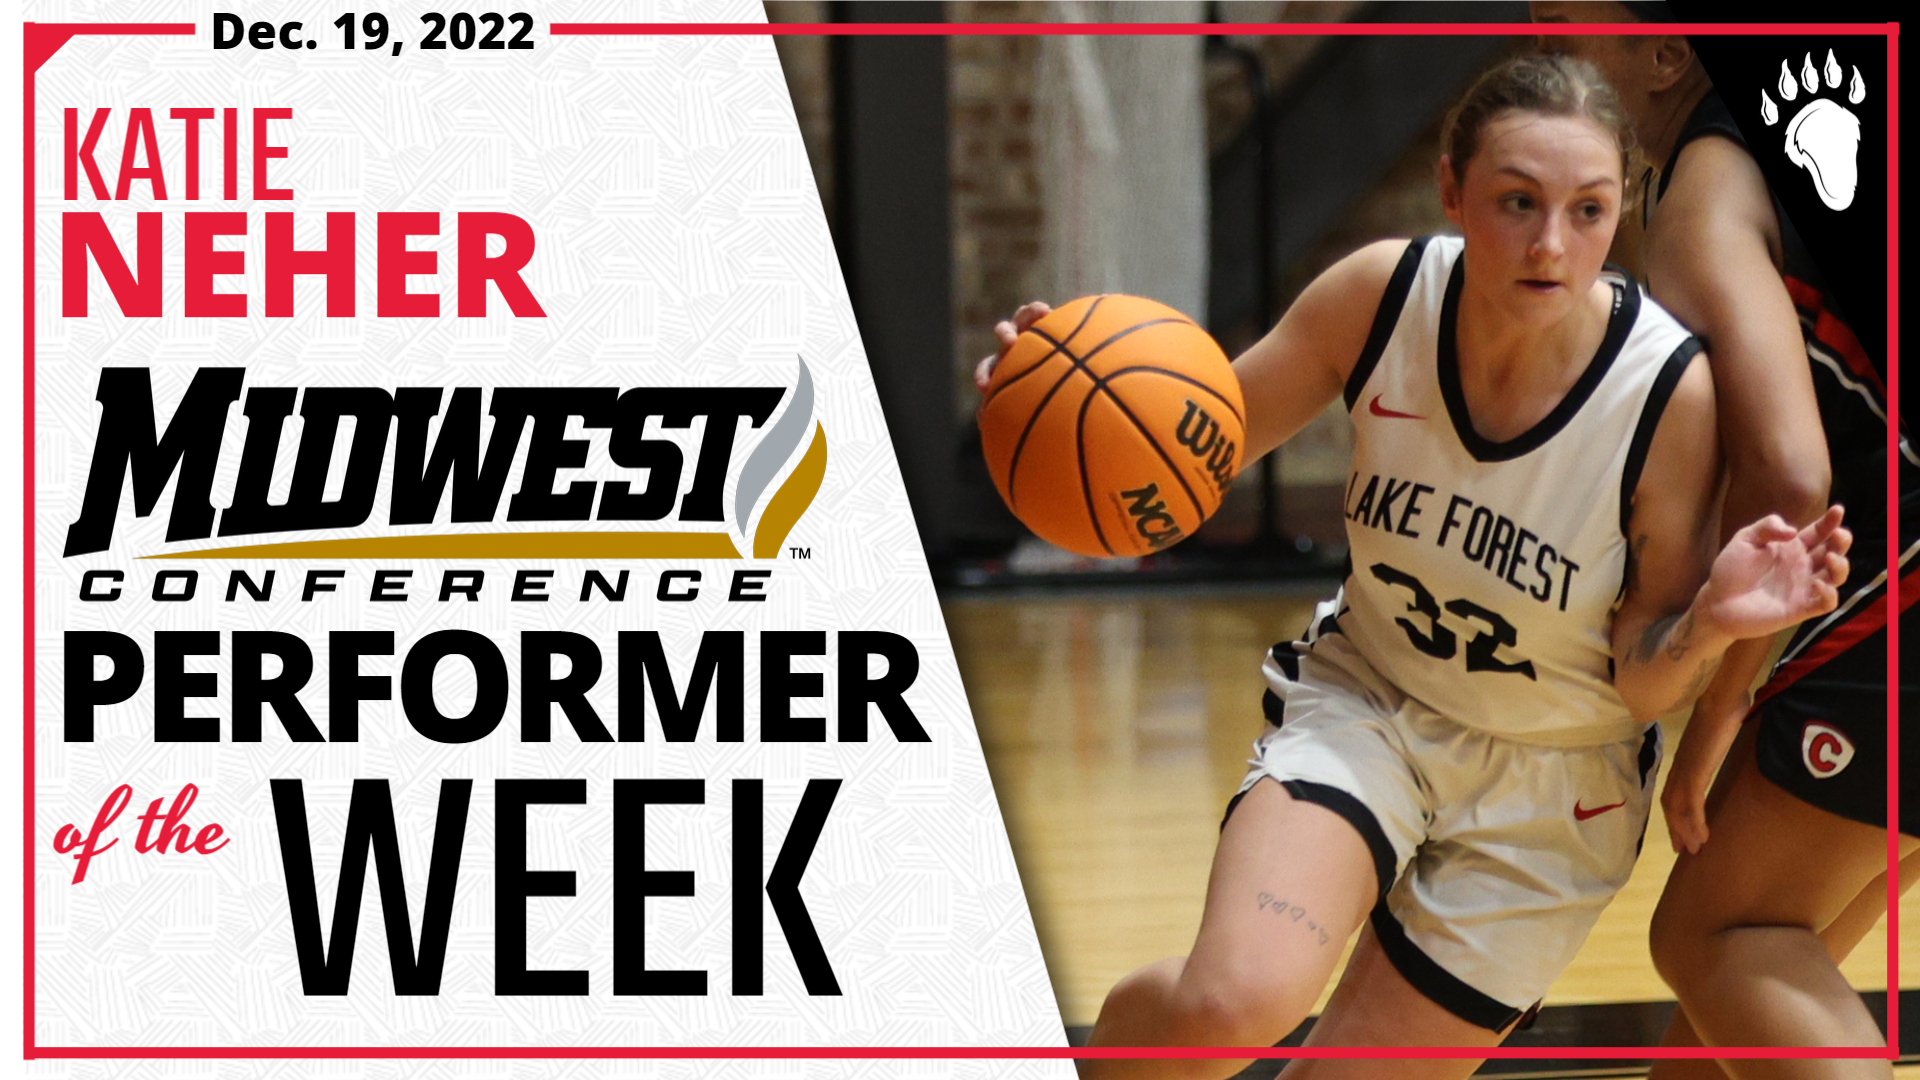 Katie Neher Earns Second MWC Performer of the Week Award this Season